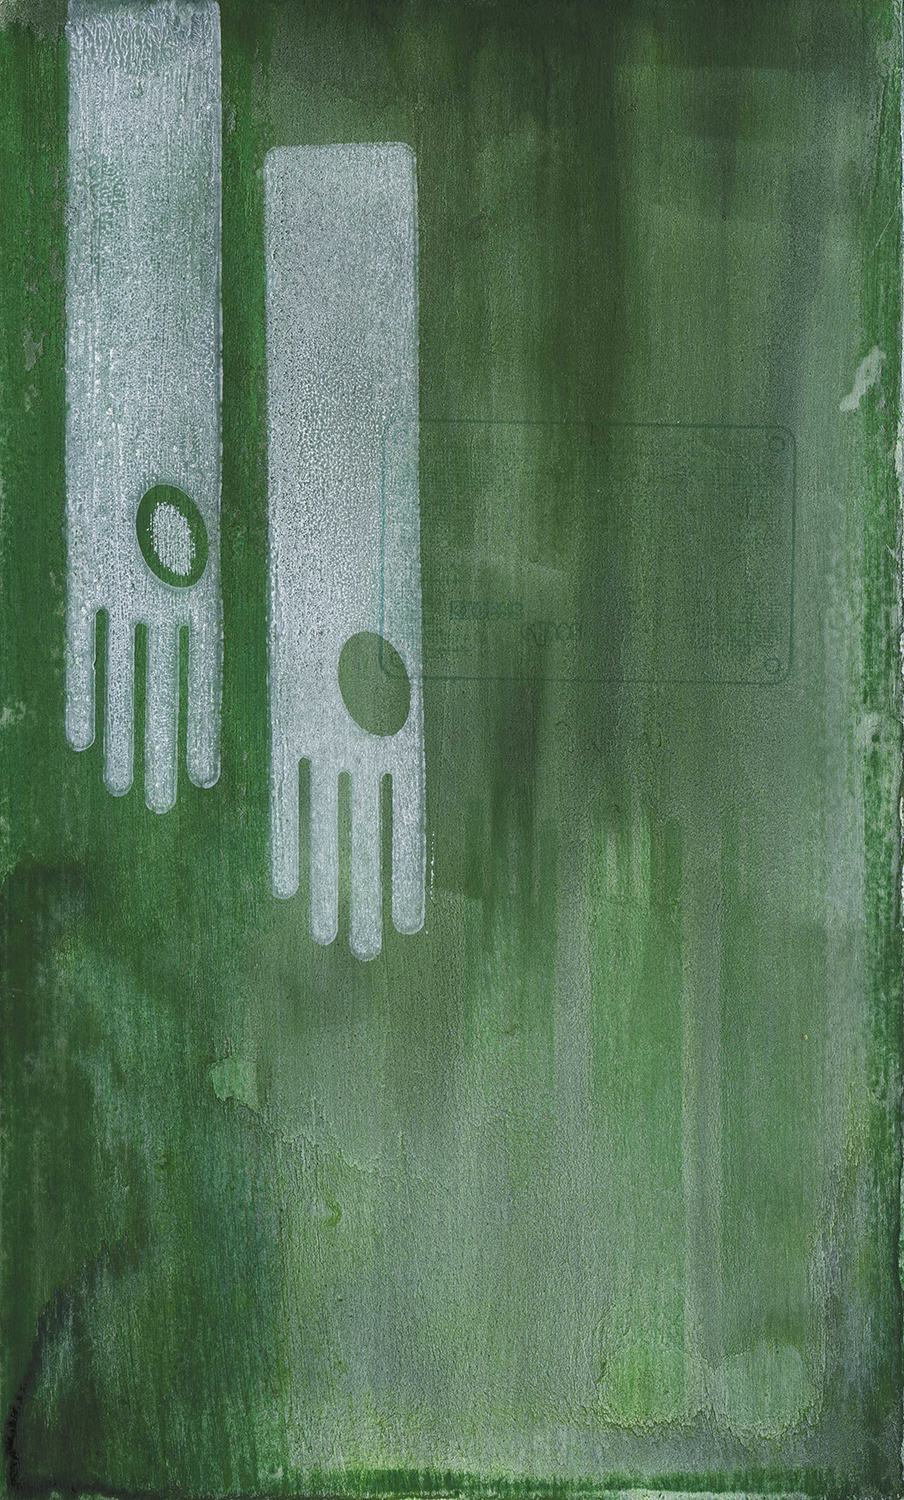 two hanging white glove forms on a green background